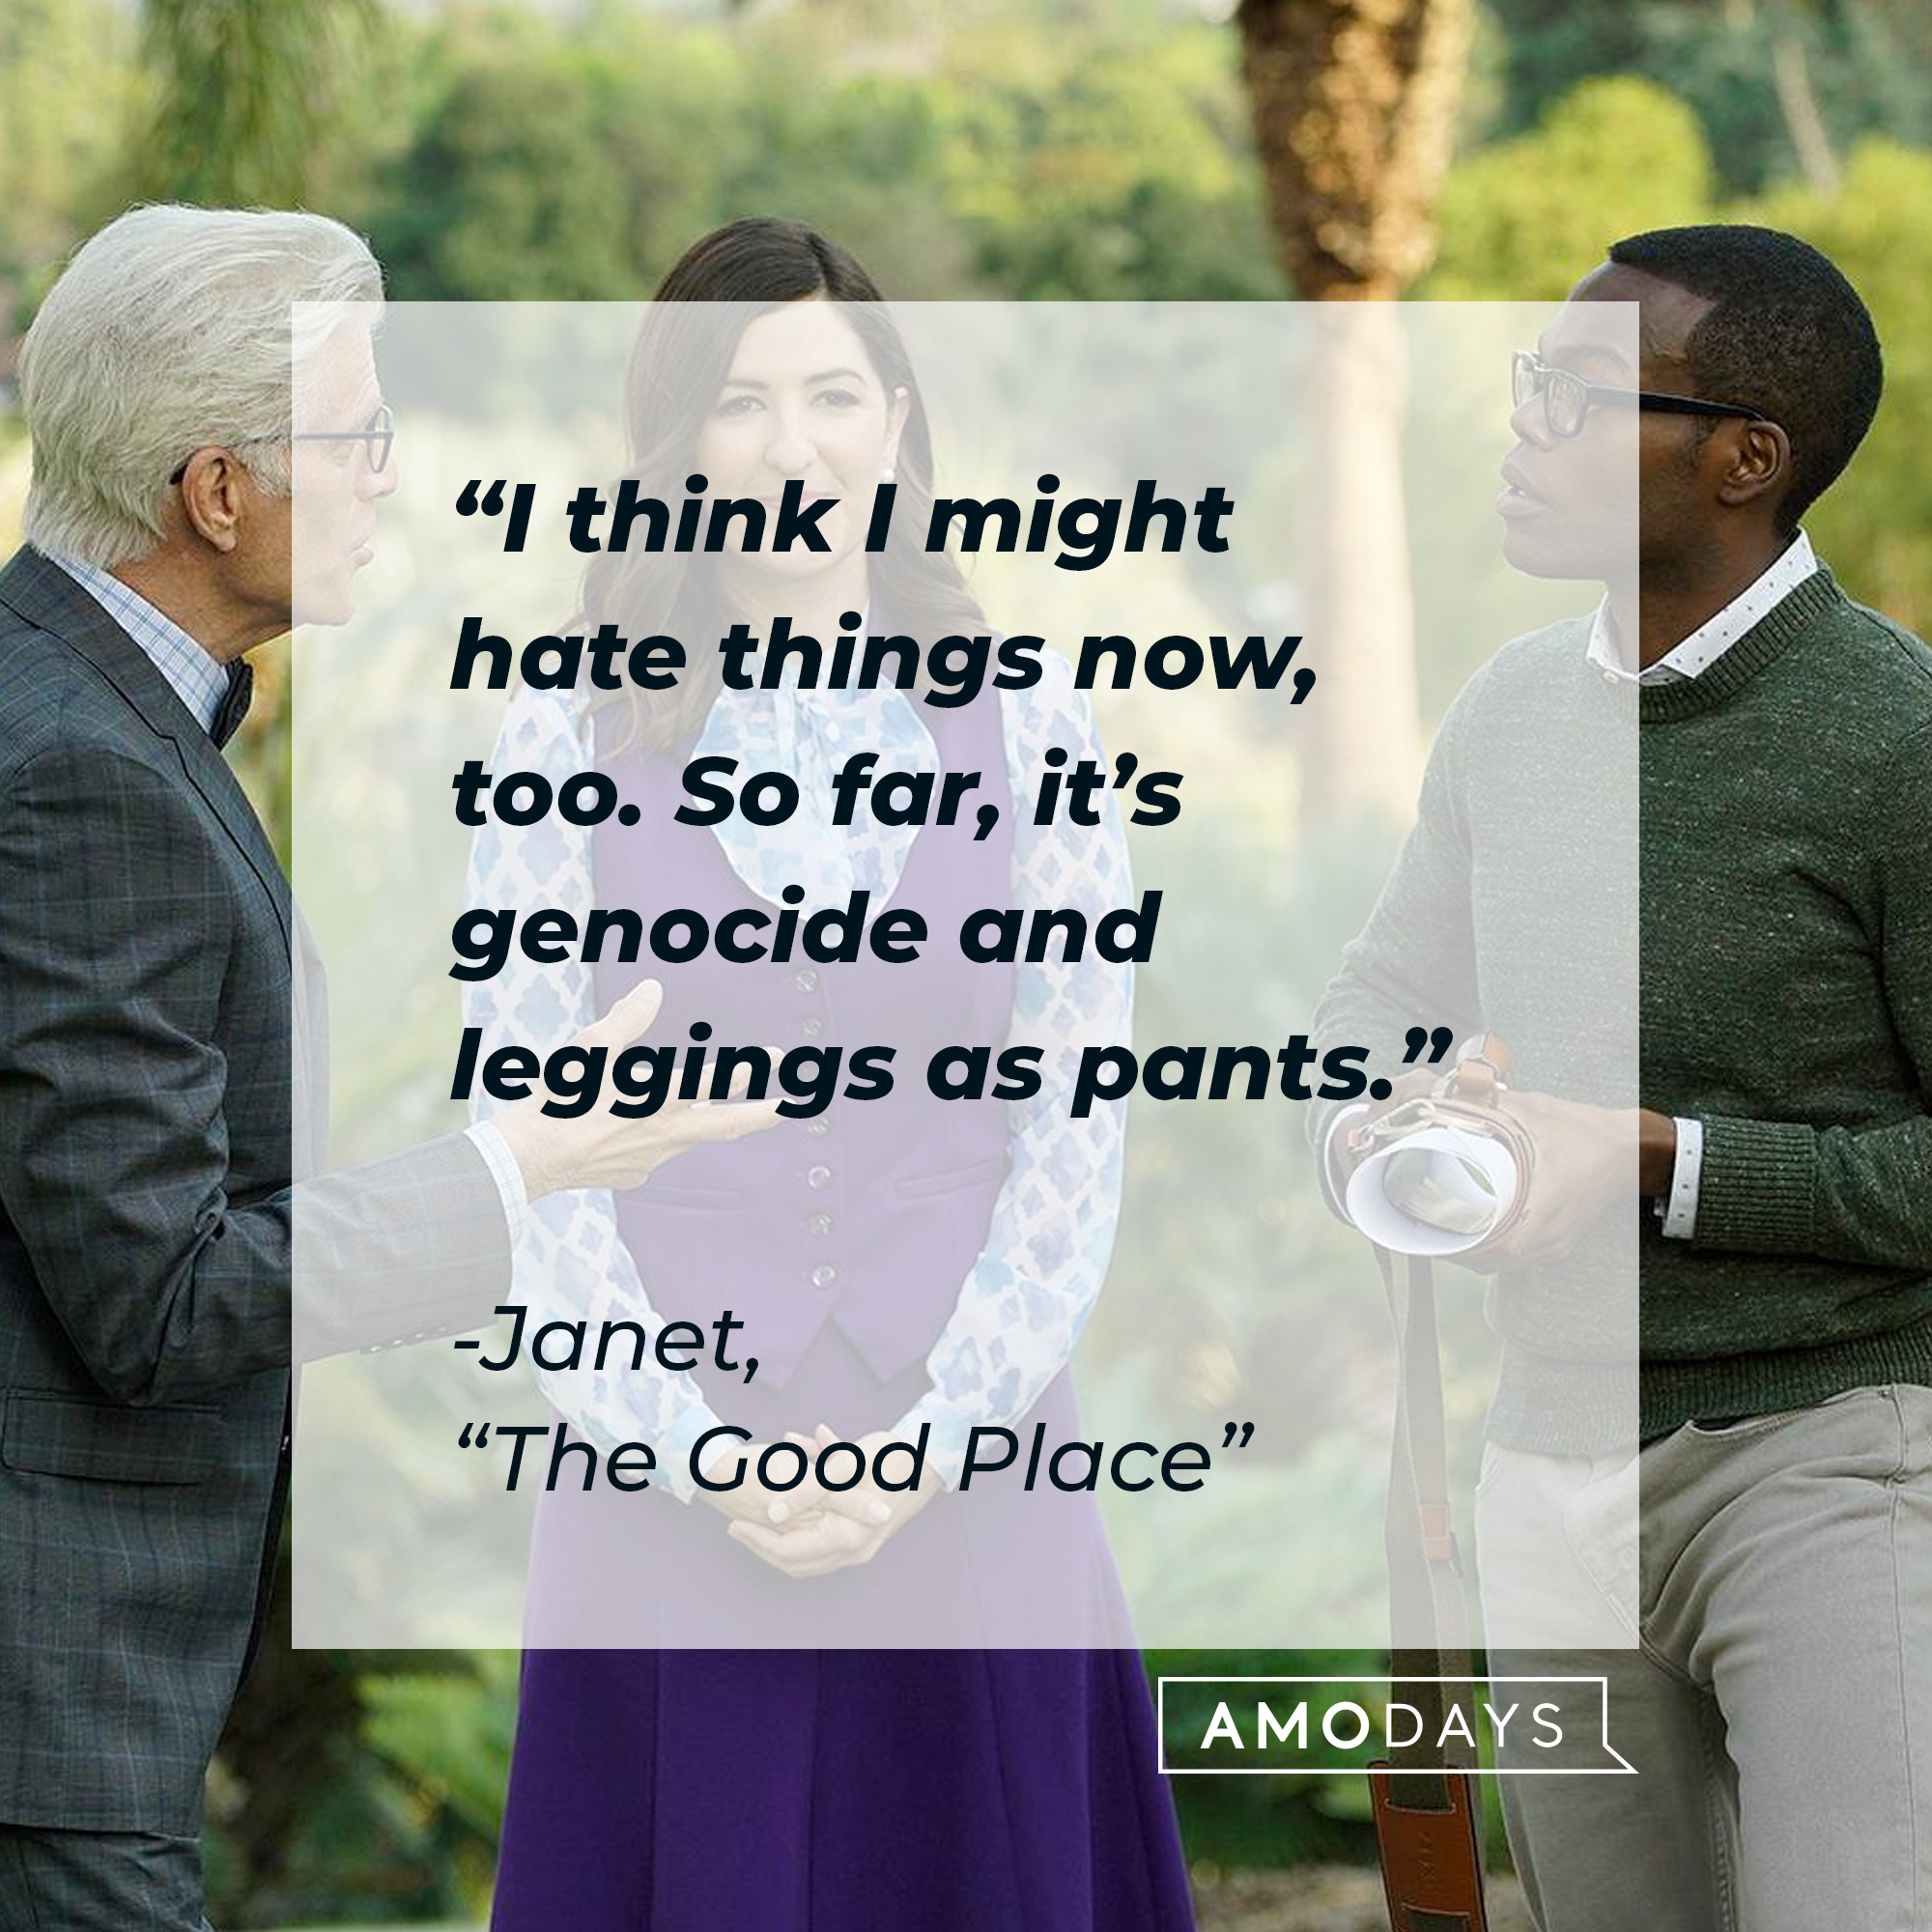 Janet's quote: “I think I might hate things now, too. So far, it’s genocide and leggings as pants.” | Source: facebook.com/NBCTheGoodPlace